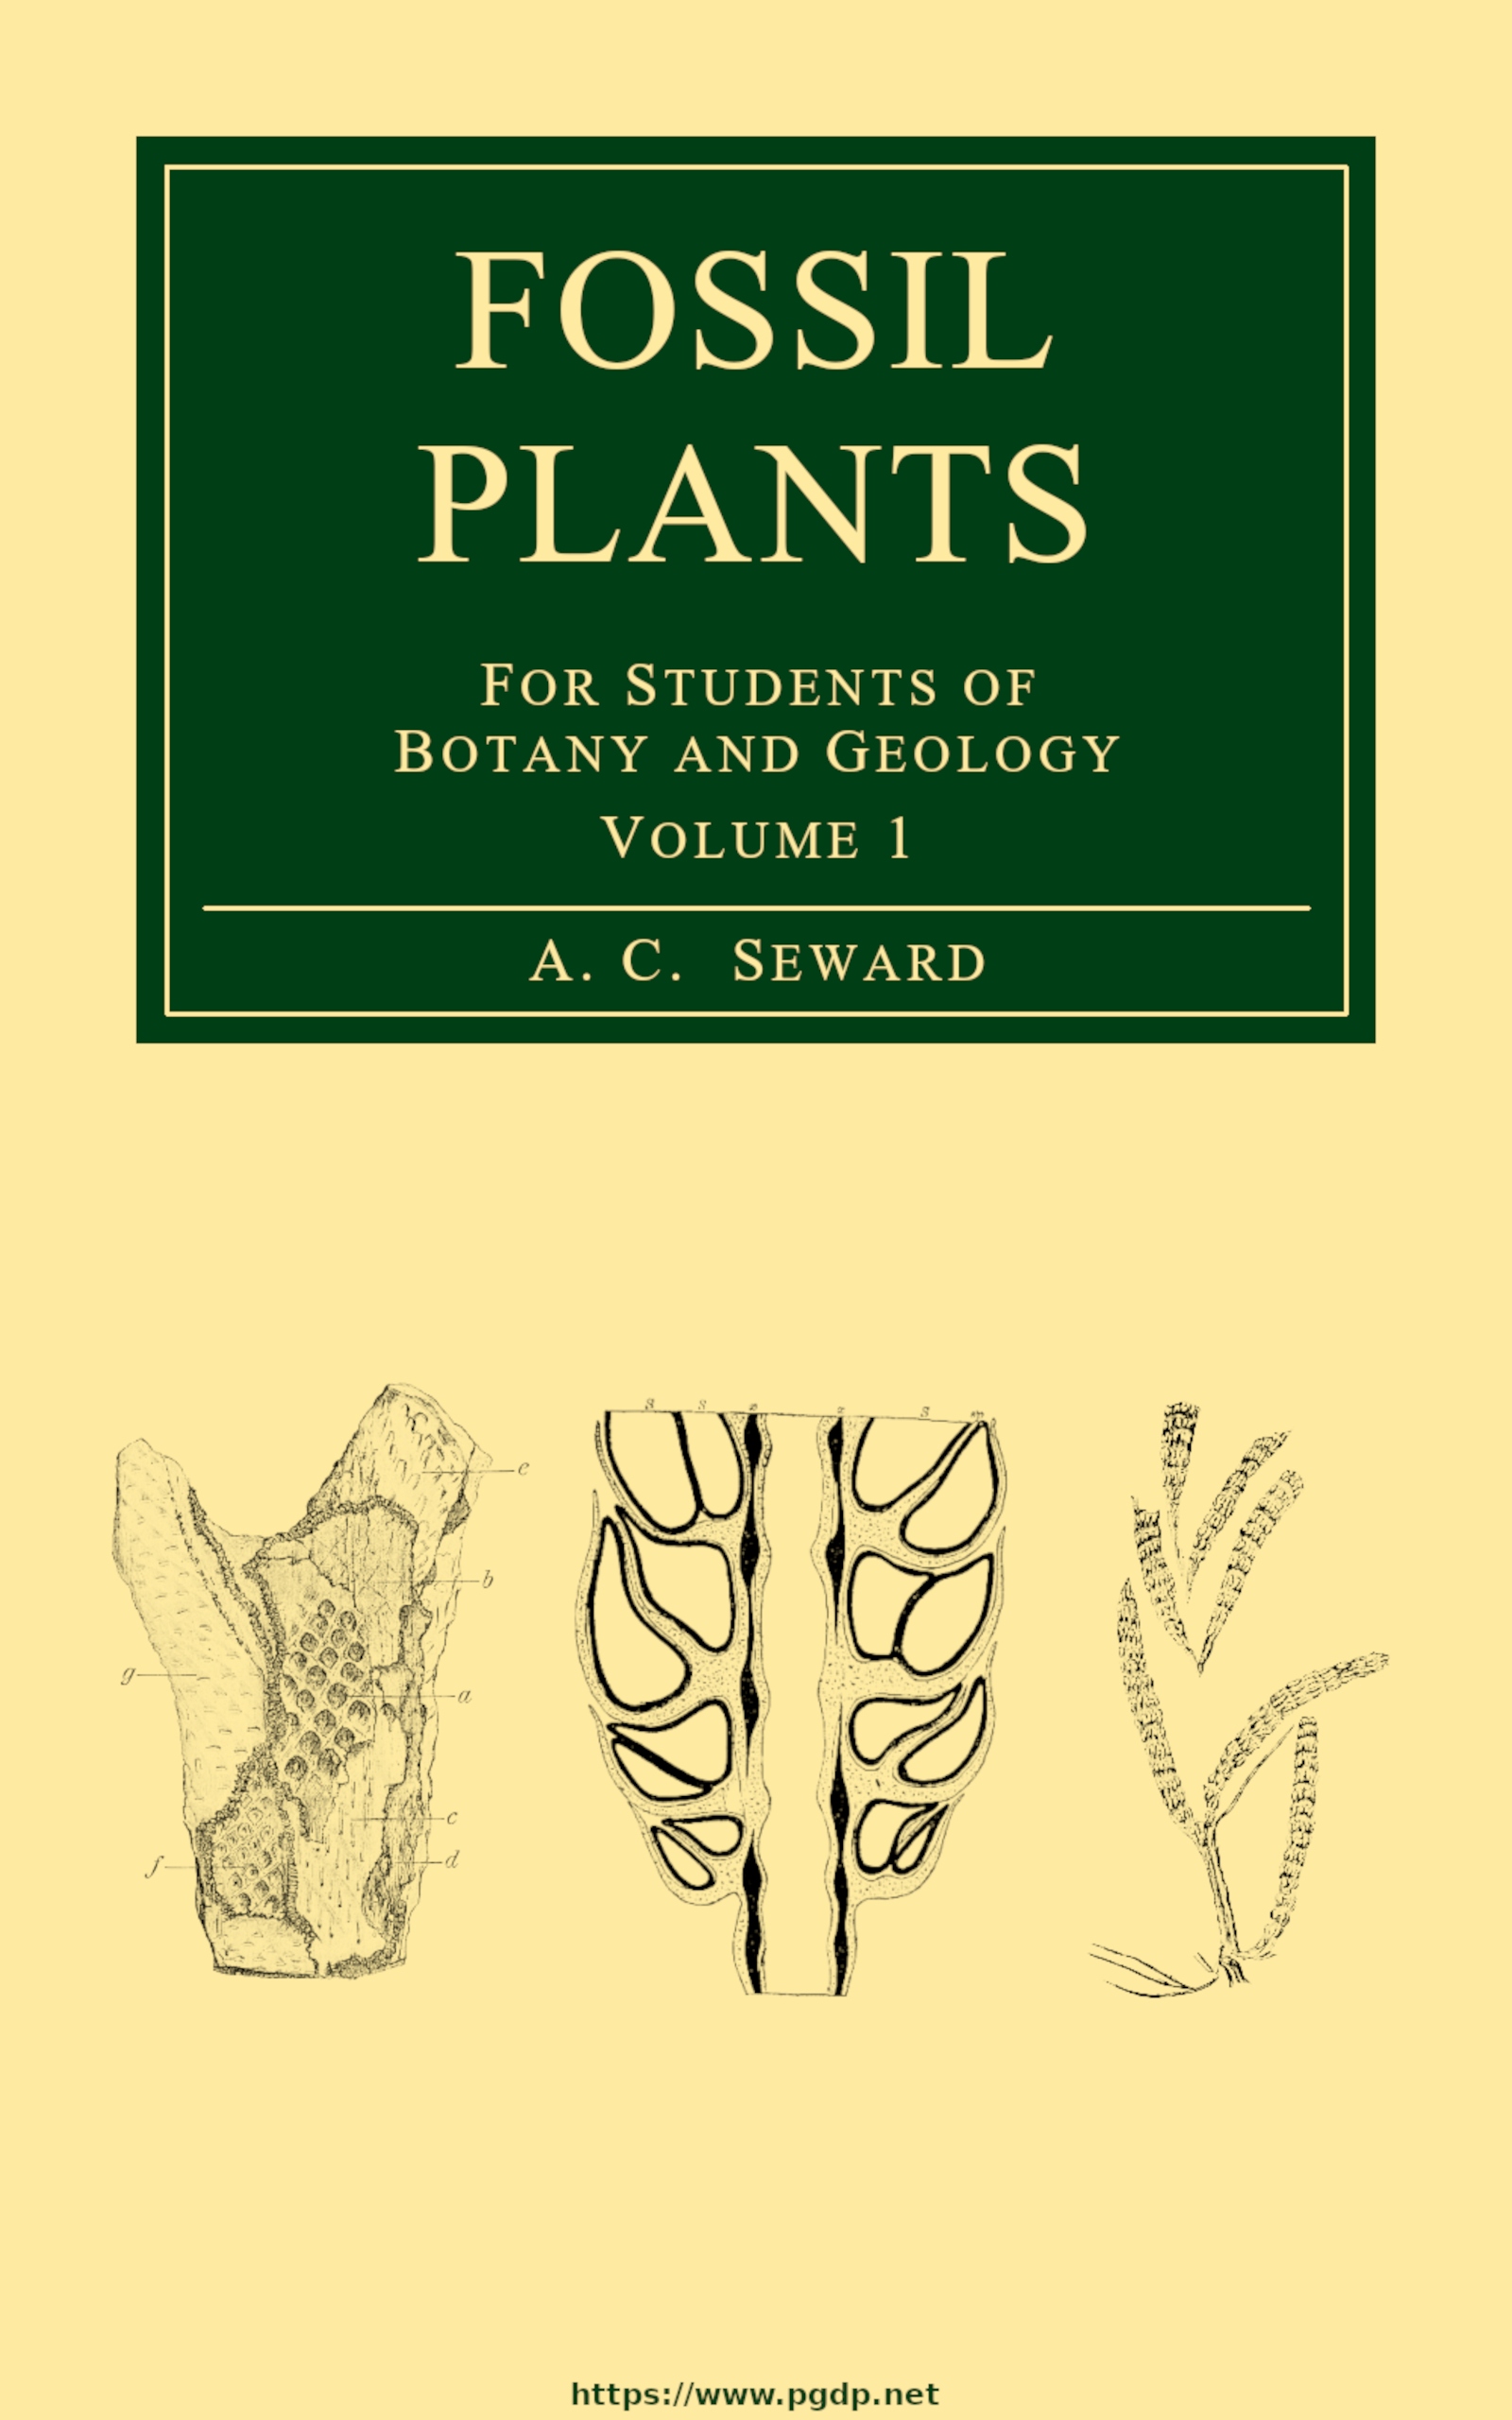 Fossil Plants, Volume 1, by A image pic